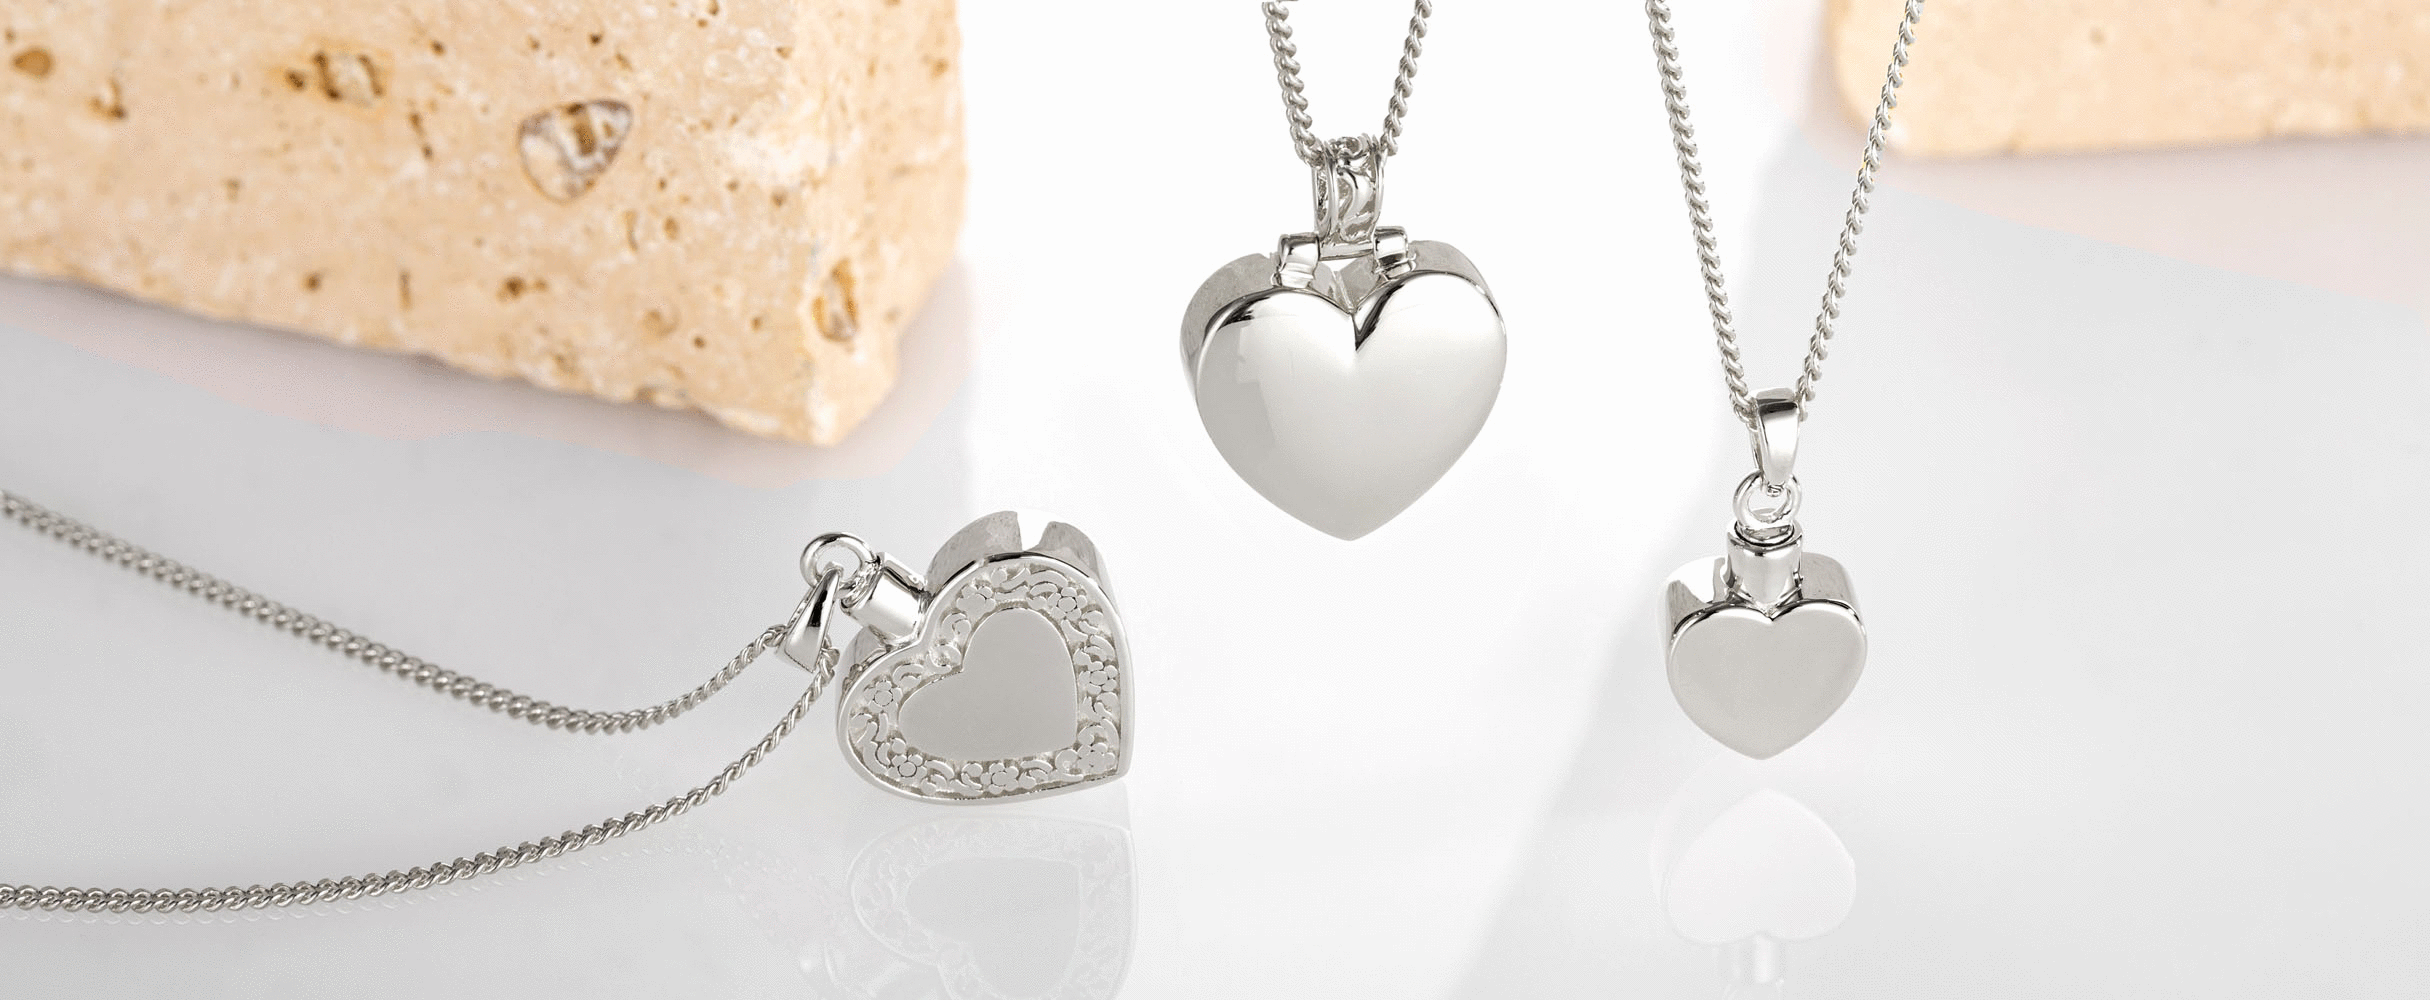 Pet Paw Print Memorial Necklace With Electrocardiogram Pendant For Ashes  Cremation Memorial Jewelry From Weikuijewelry, $1.5 | DHgate.Com